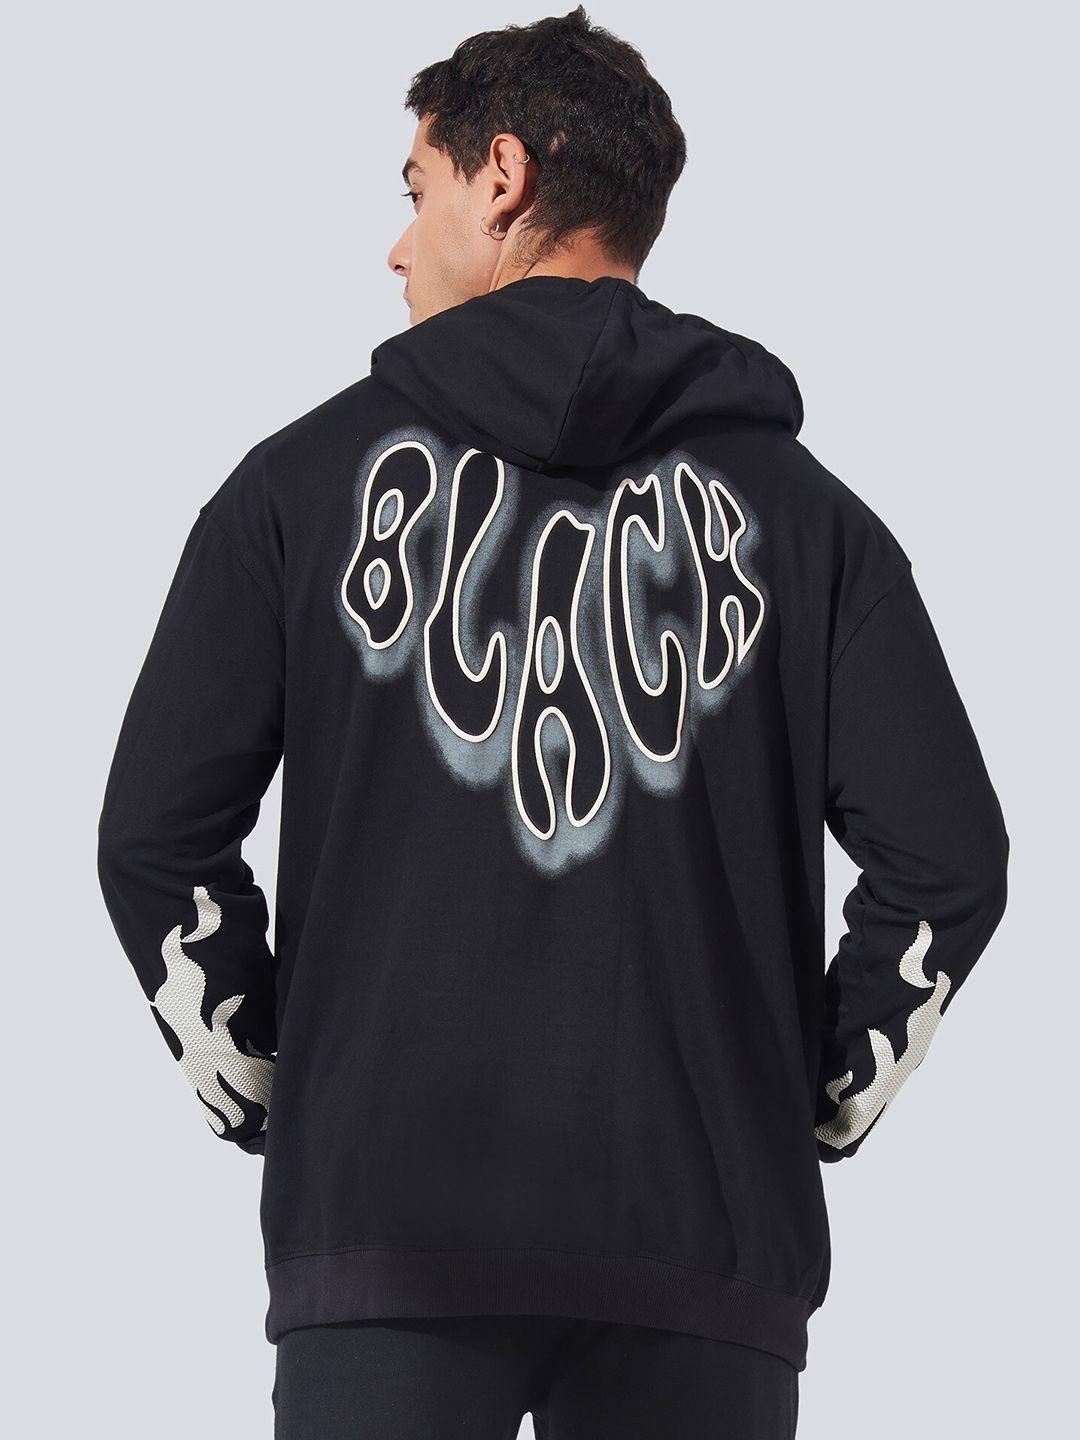 maniac-typography-printed-front-open-hooded-pure-cotton-sweatshirt